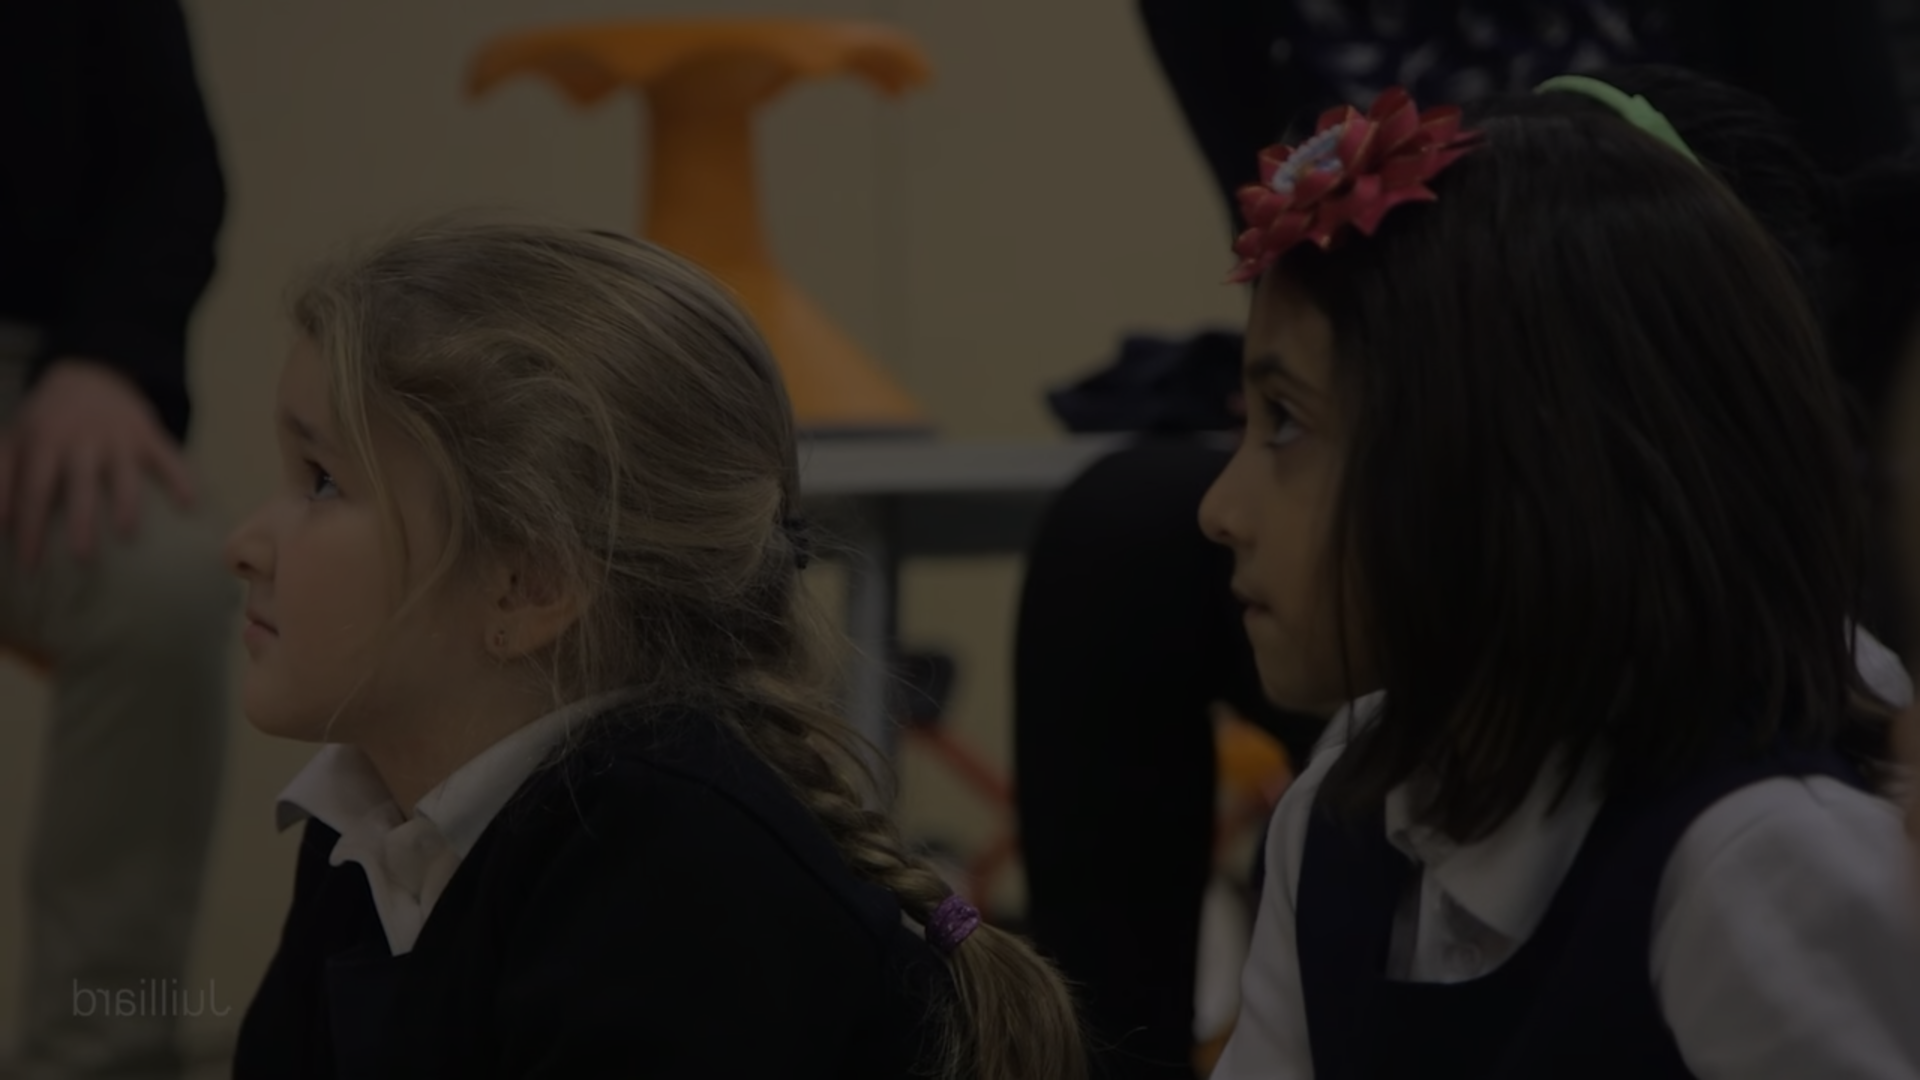 Video profile of the Juilliard School and Nord Anglia Education's Chicago programs